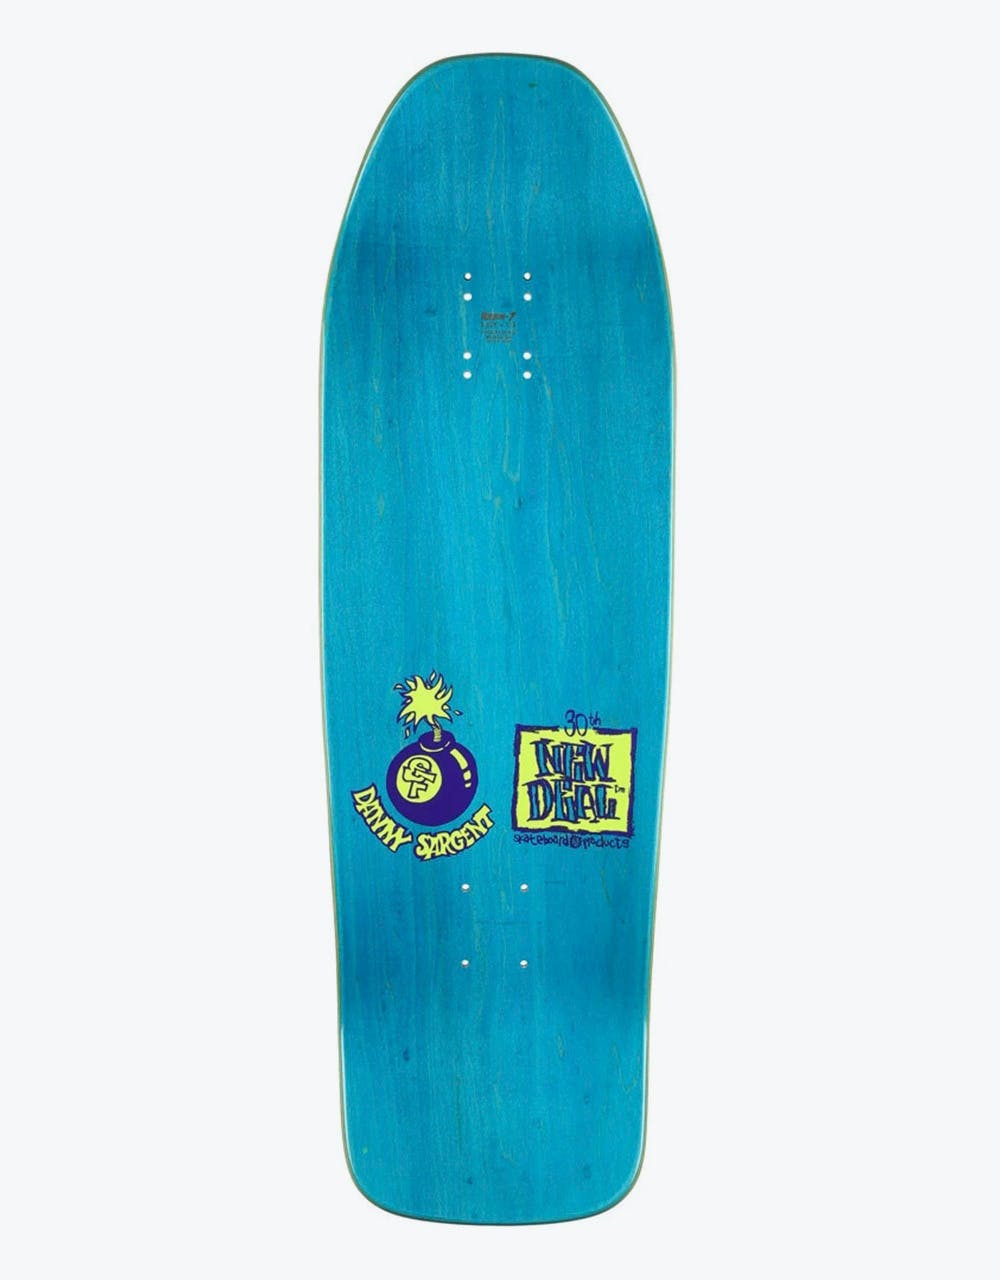 The New Deal Sargent Monkey Bomber Neon HT Skateboard Deck - 9.625"